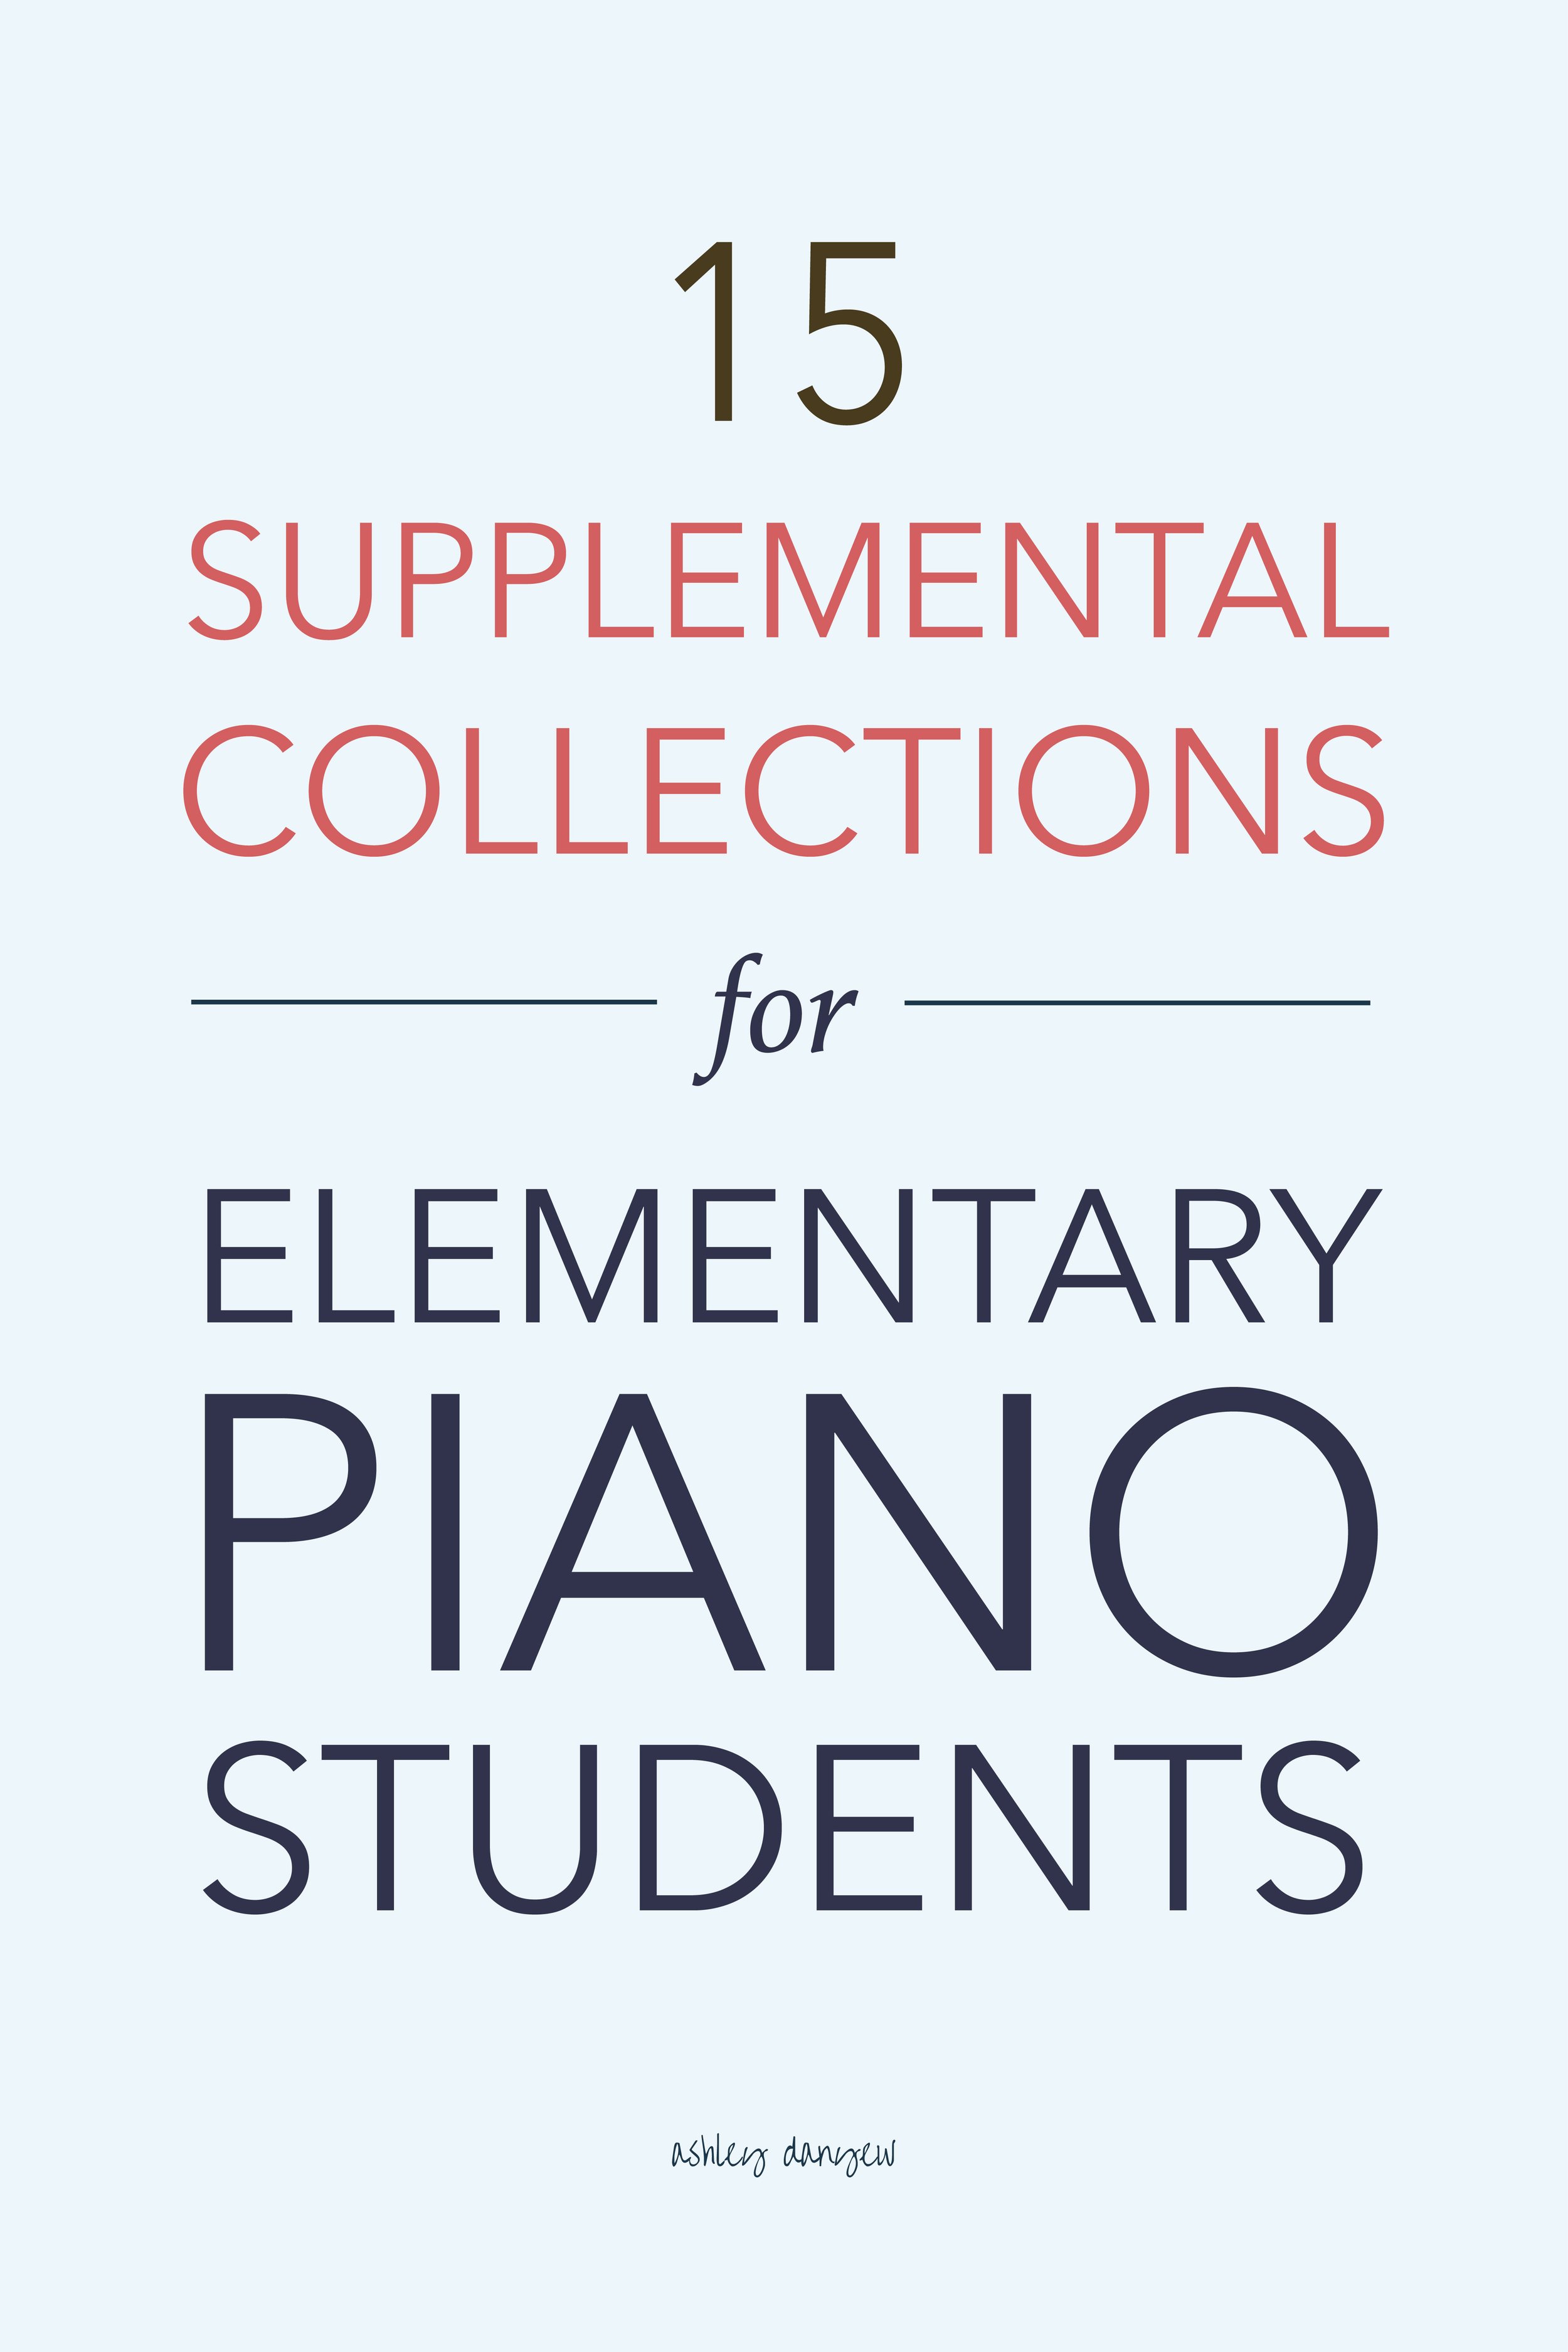 15 Supplemental Collections for Elementary Piano Students